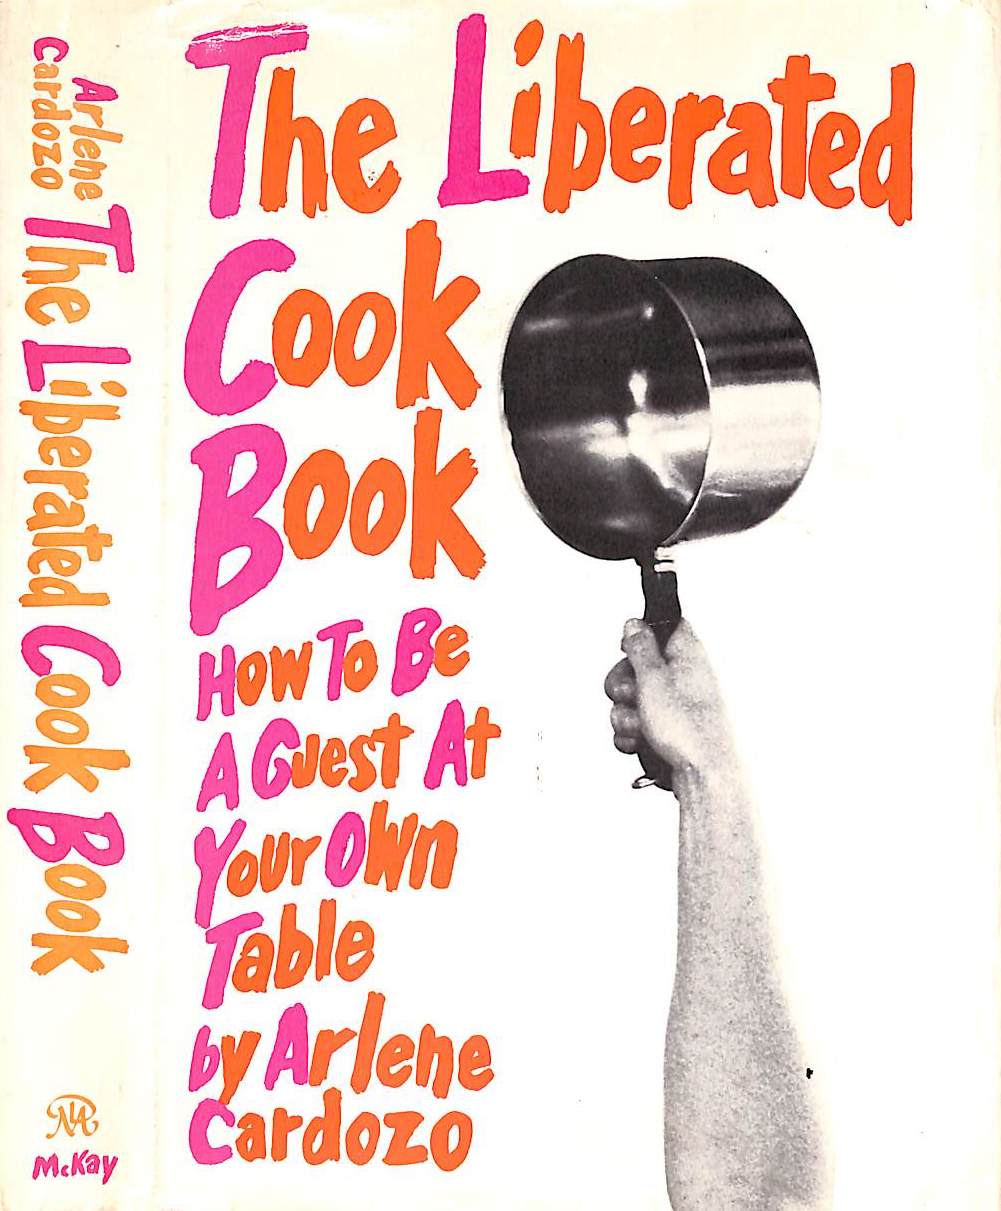 "The Liberated Cook Book: How To Be A Guest At Your Own Table" 1972 CARDOZO, Arlene (SOLD)